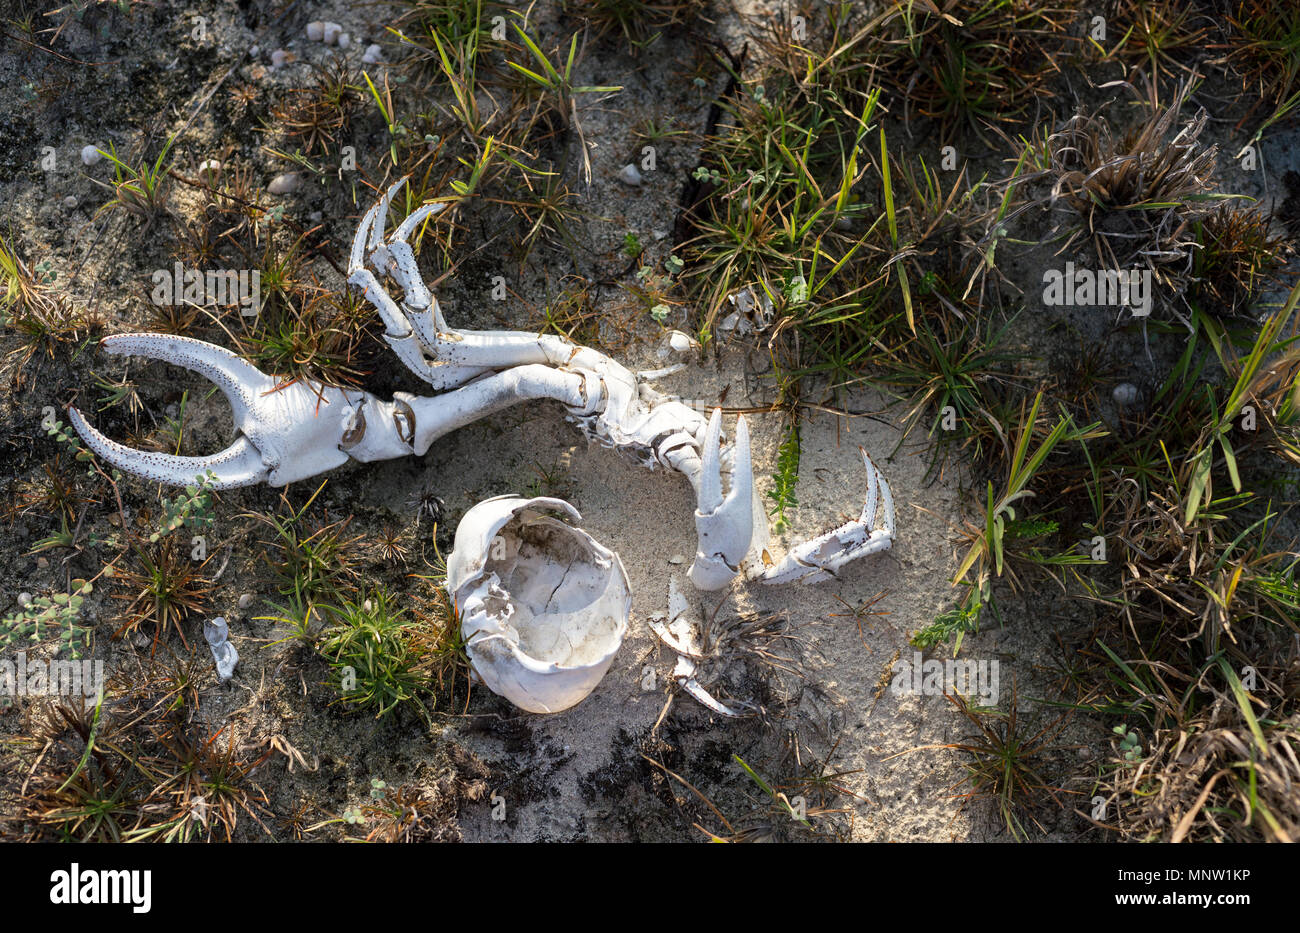 A crab shed its shell and left it behind to bleach out in the hot Caribbean sun Stock Photo